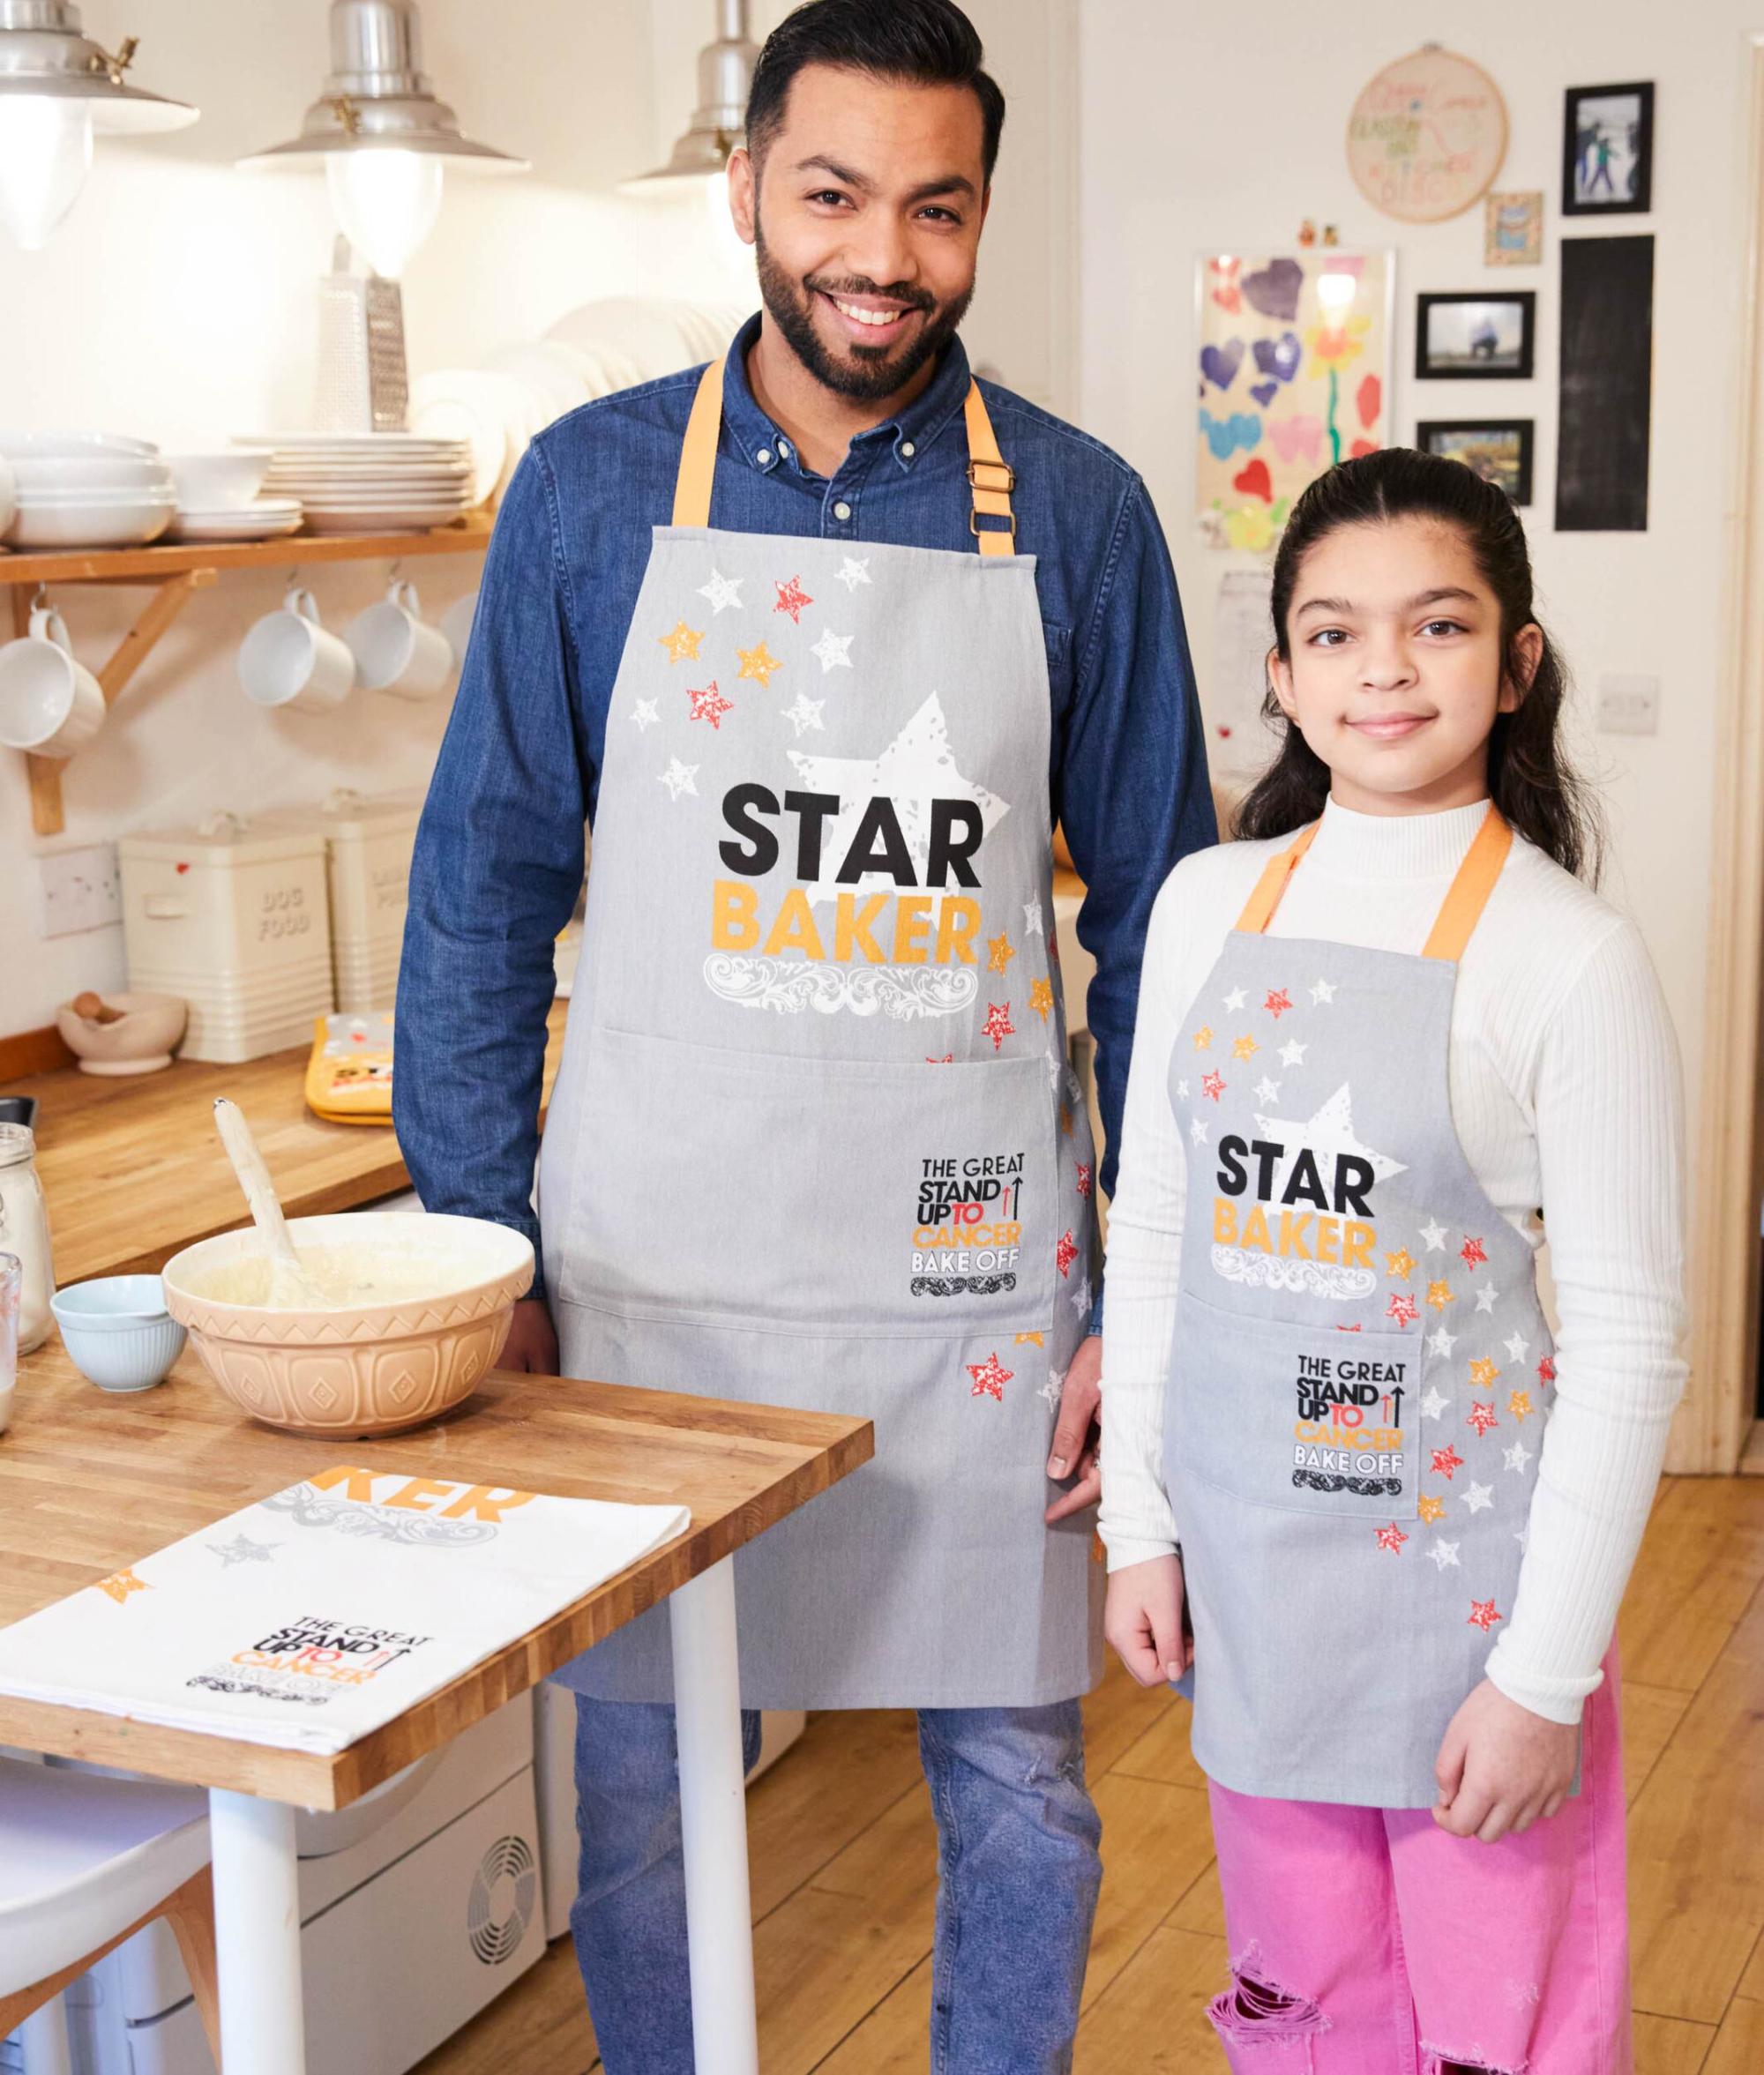 Cancer research star baker apron